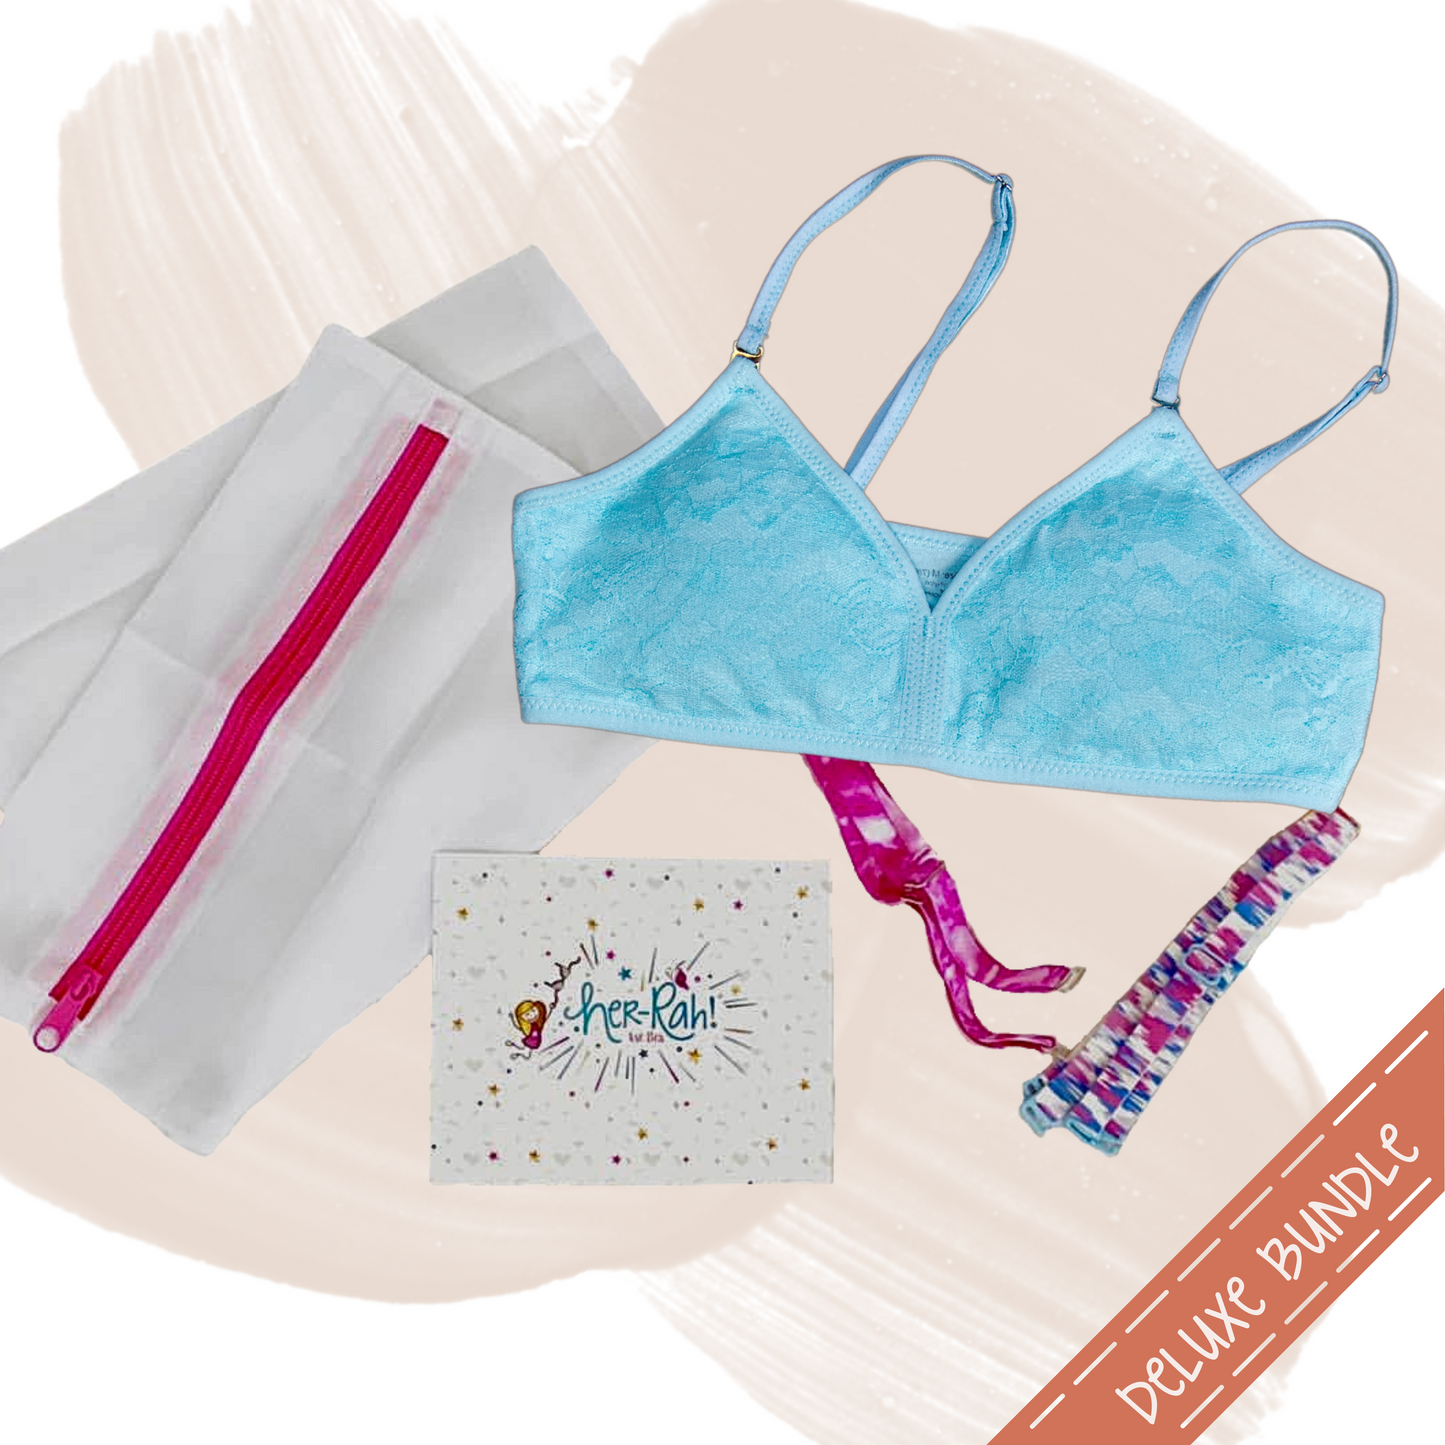  The Deluxe Bra Bundle includes 1 Bra, 2 additional sets of our detachable & interchangeable straps and 1 mesh laundry bag. All items come carefully packed into a gift box with our signature pink bow and card from the Her-Rah! Team to celebrate!